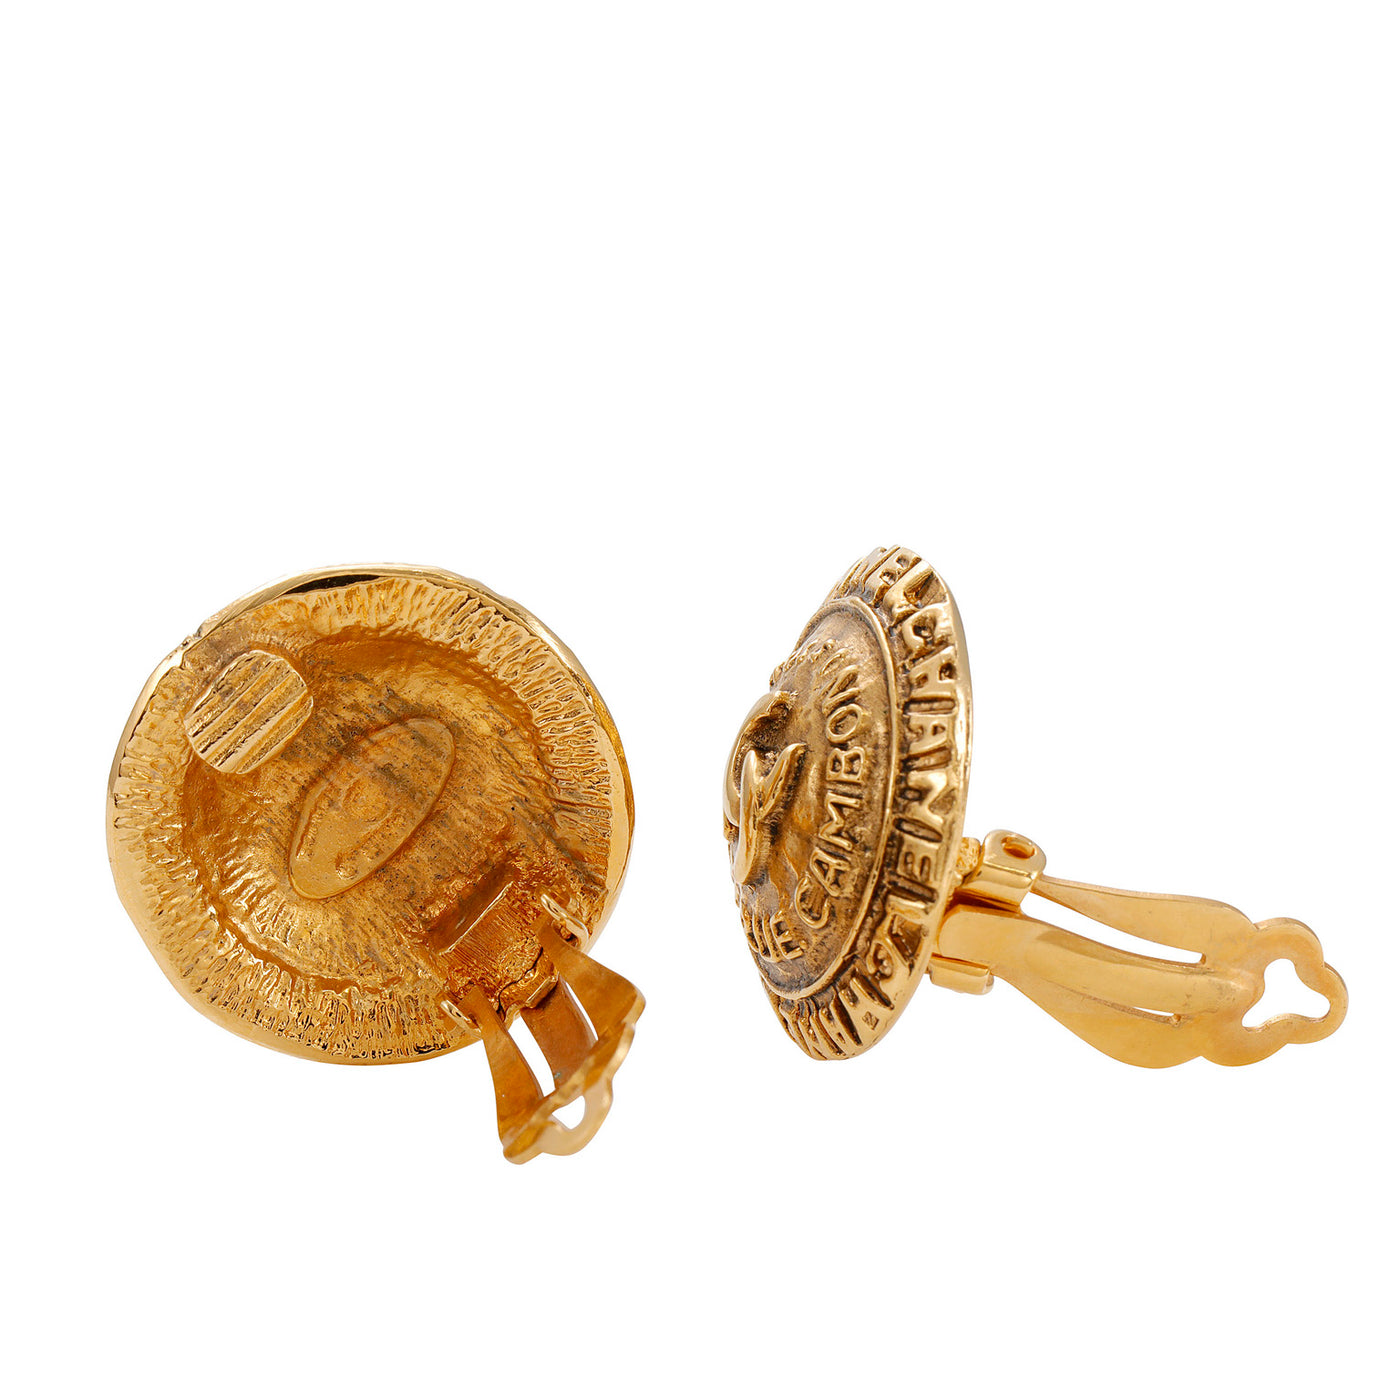 Chanel Gold "Rue Cambon 31" CC Vintage Earrings